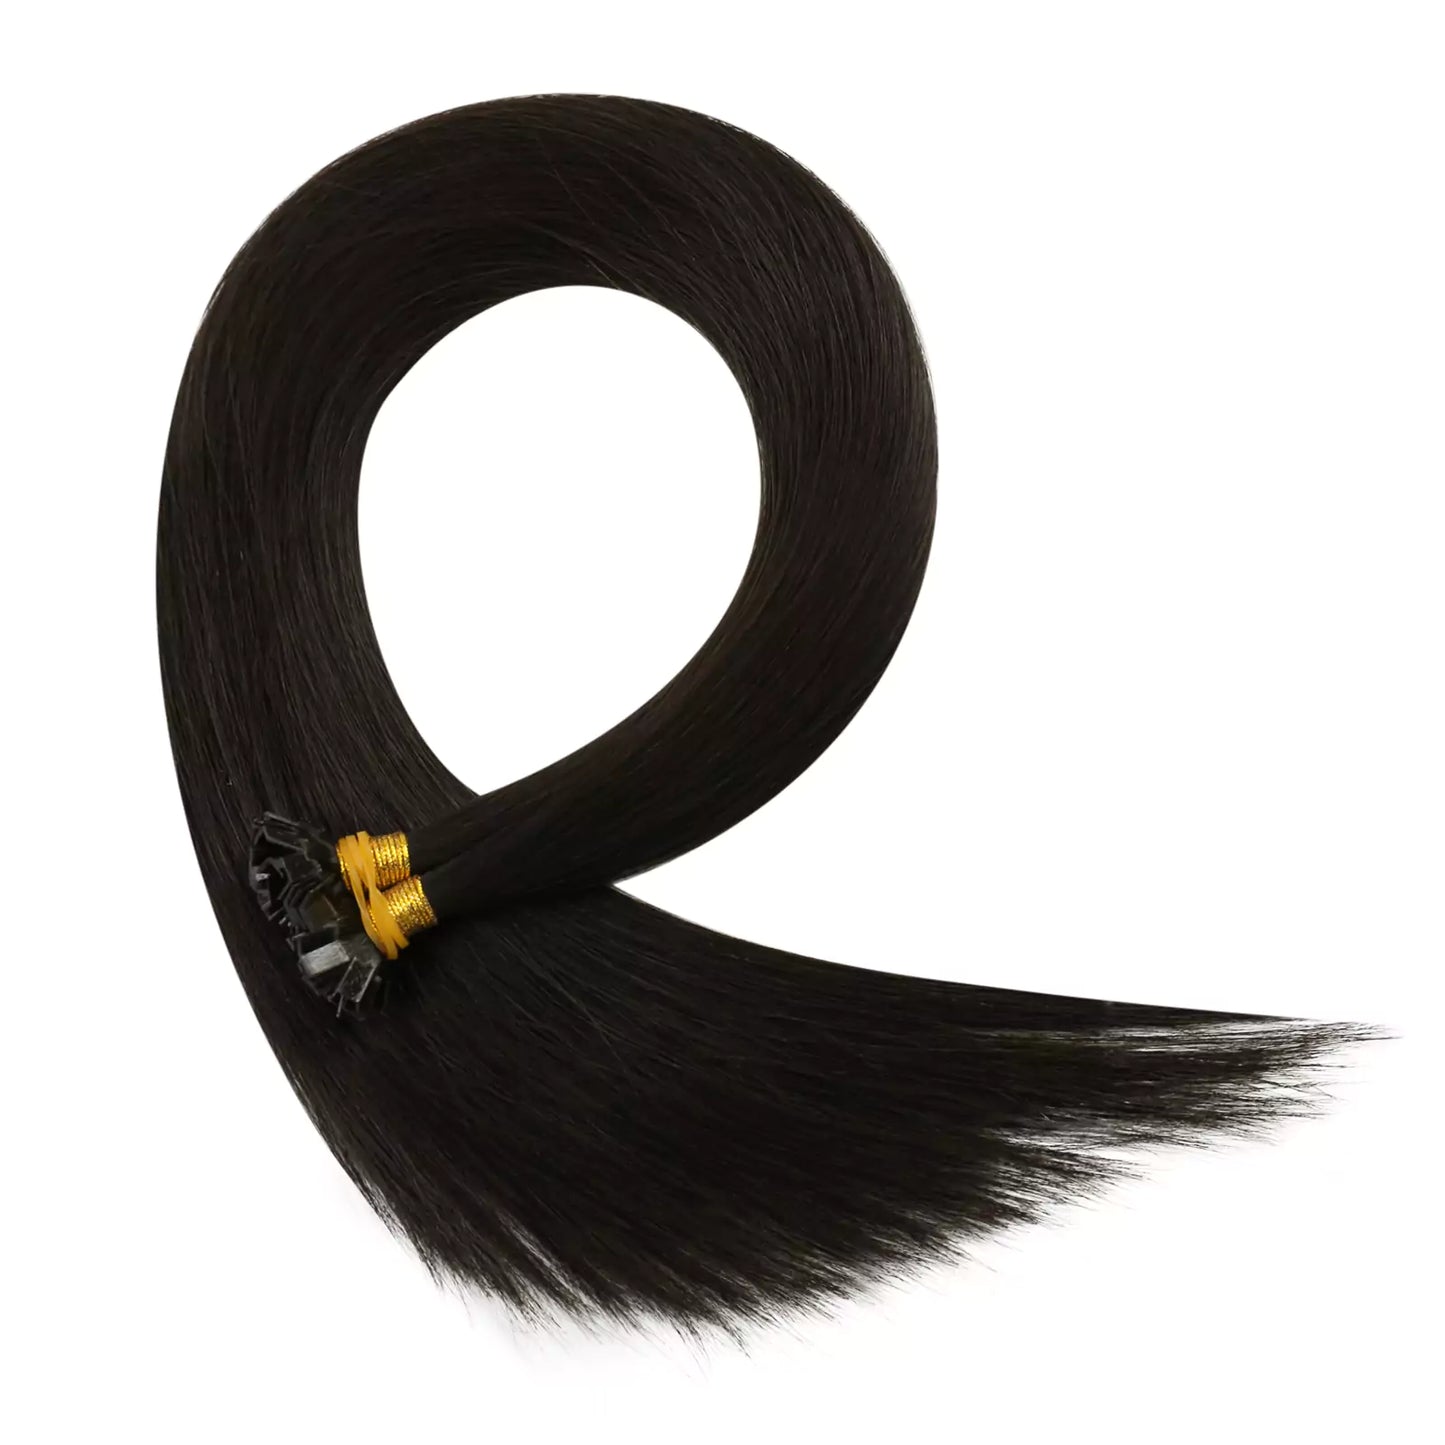 Ktip Extensions high quality virgin hair extensions wholesale